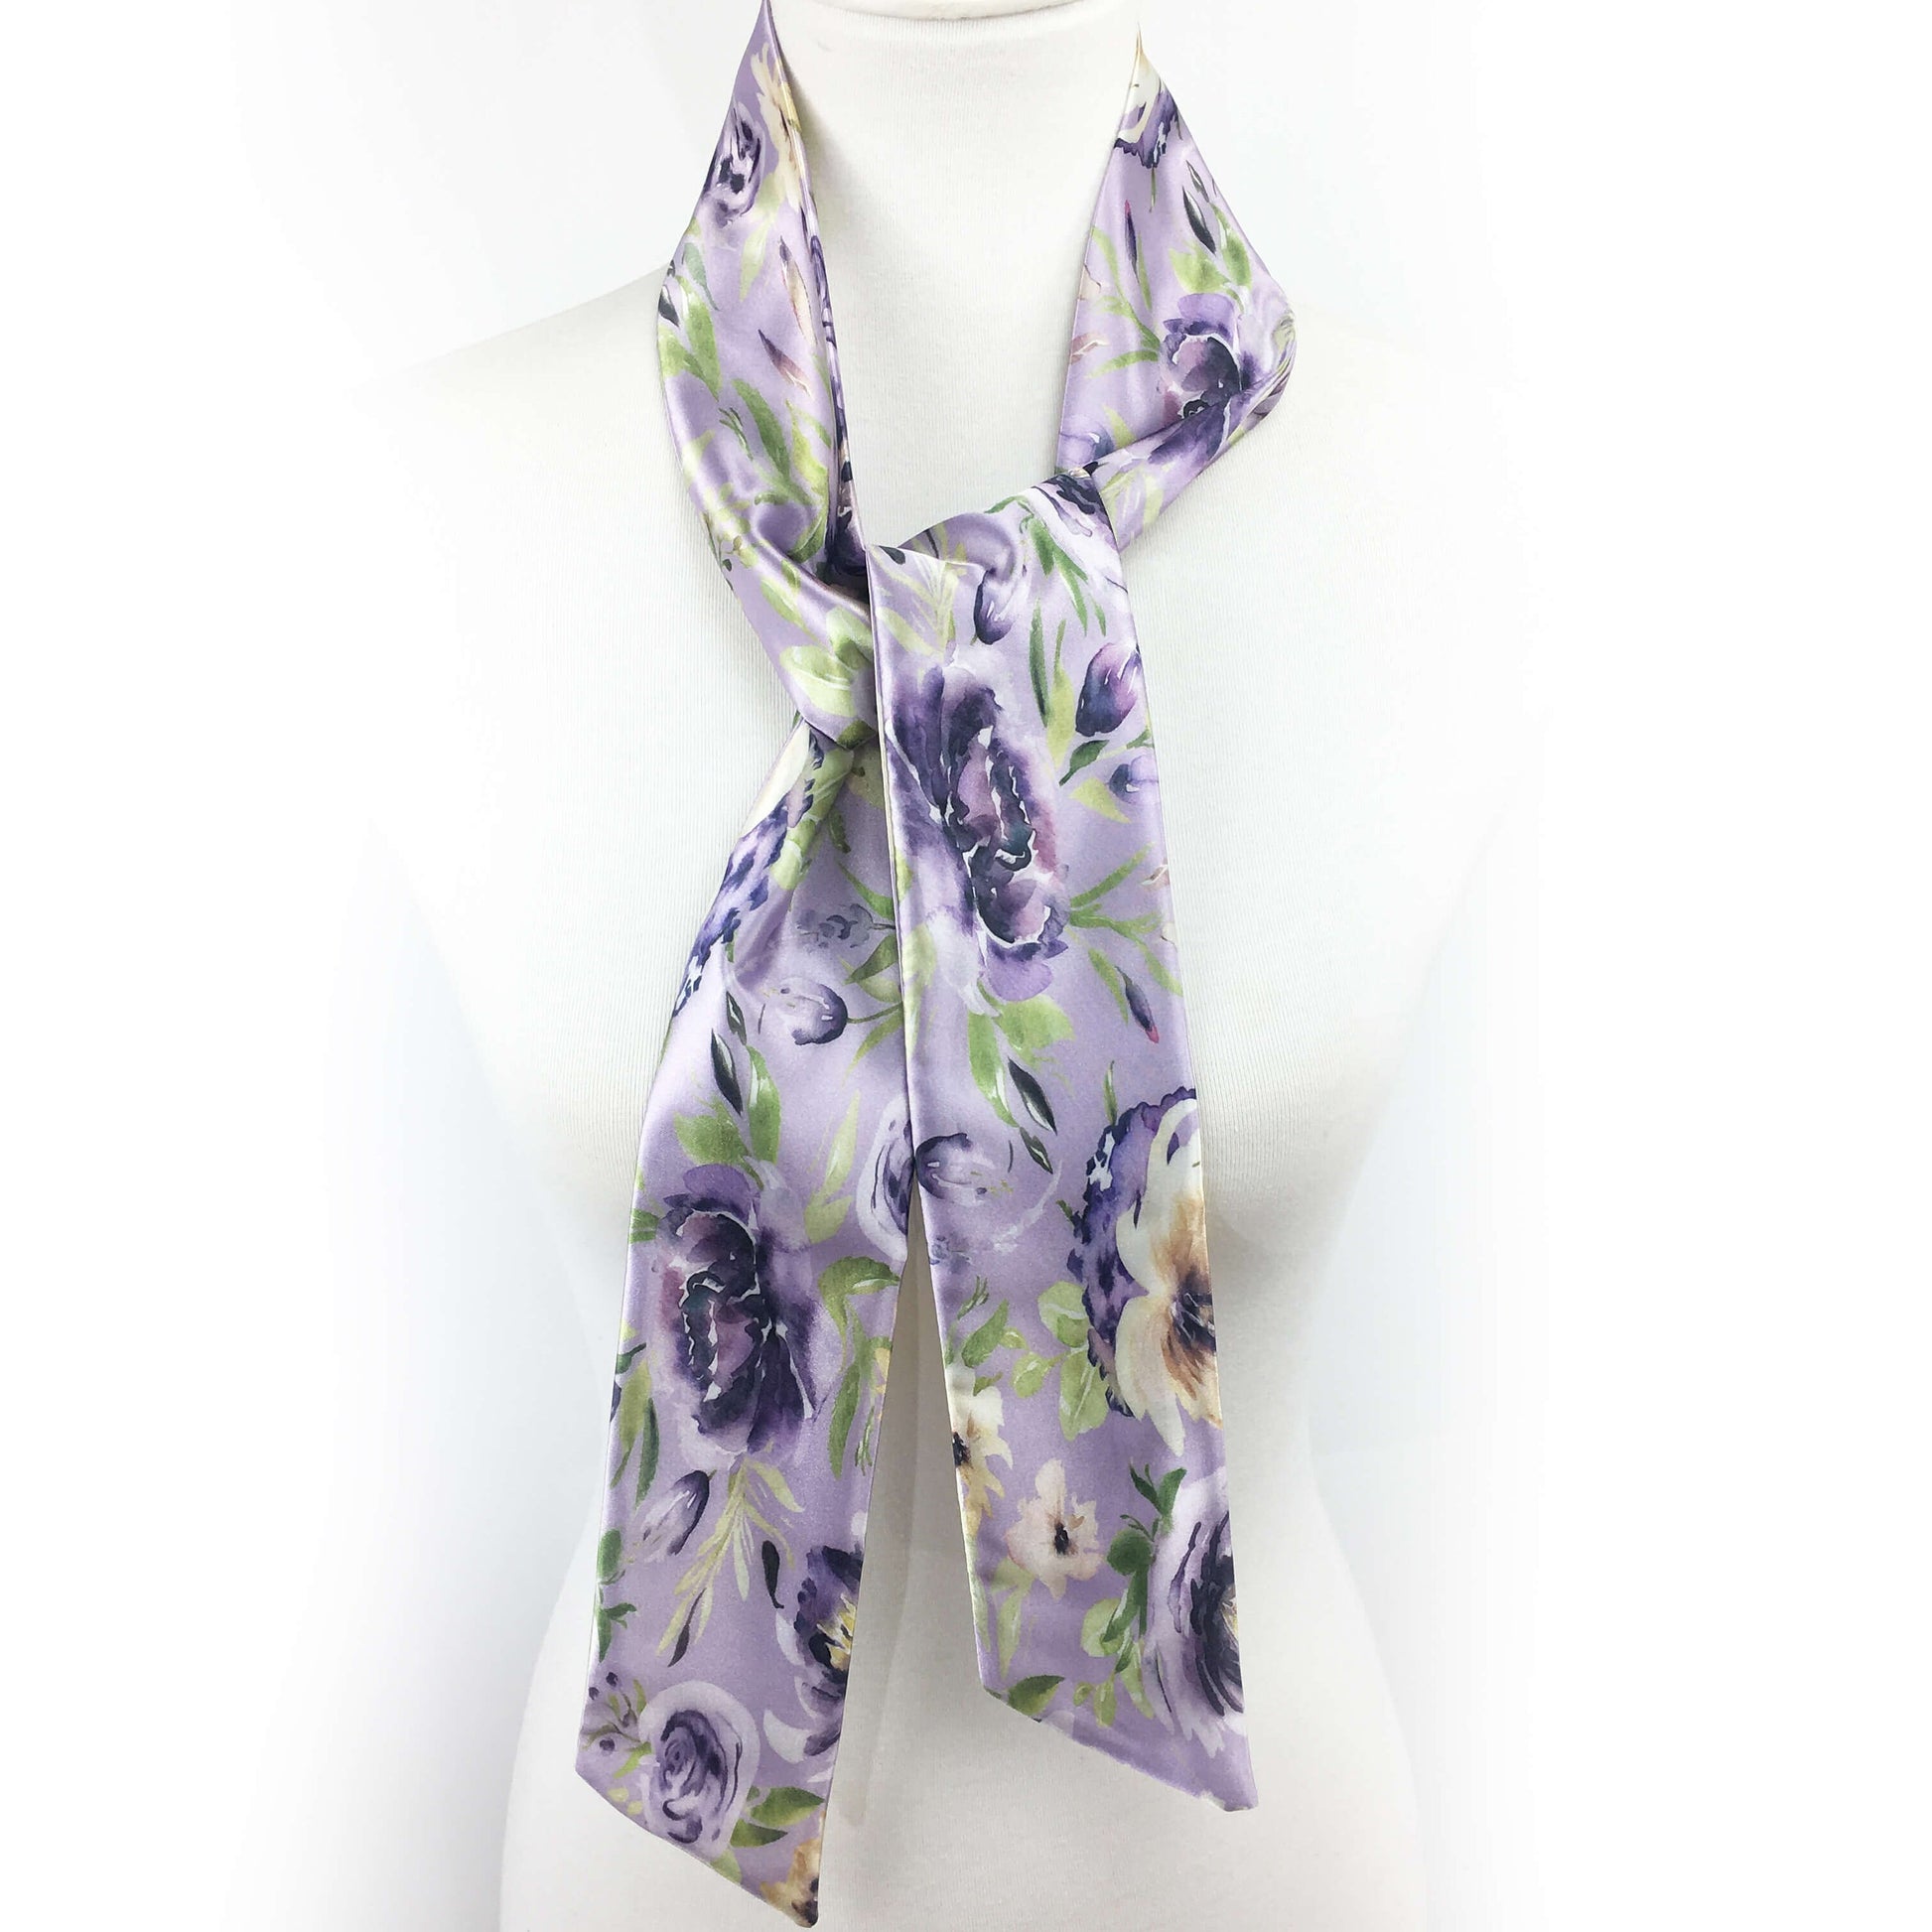 Mixed Watercolor Lavender,Skinny Scarf,Woman Scarf,All season scarf,LightweightScarf,ladies scarf,artist scarf,painted scarf,satin tie scarf